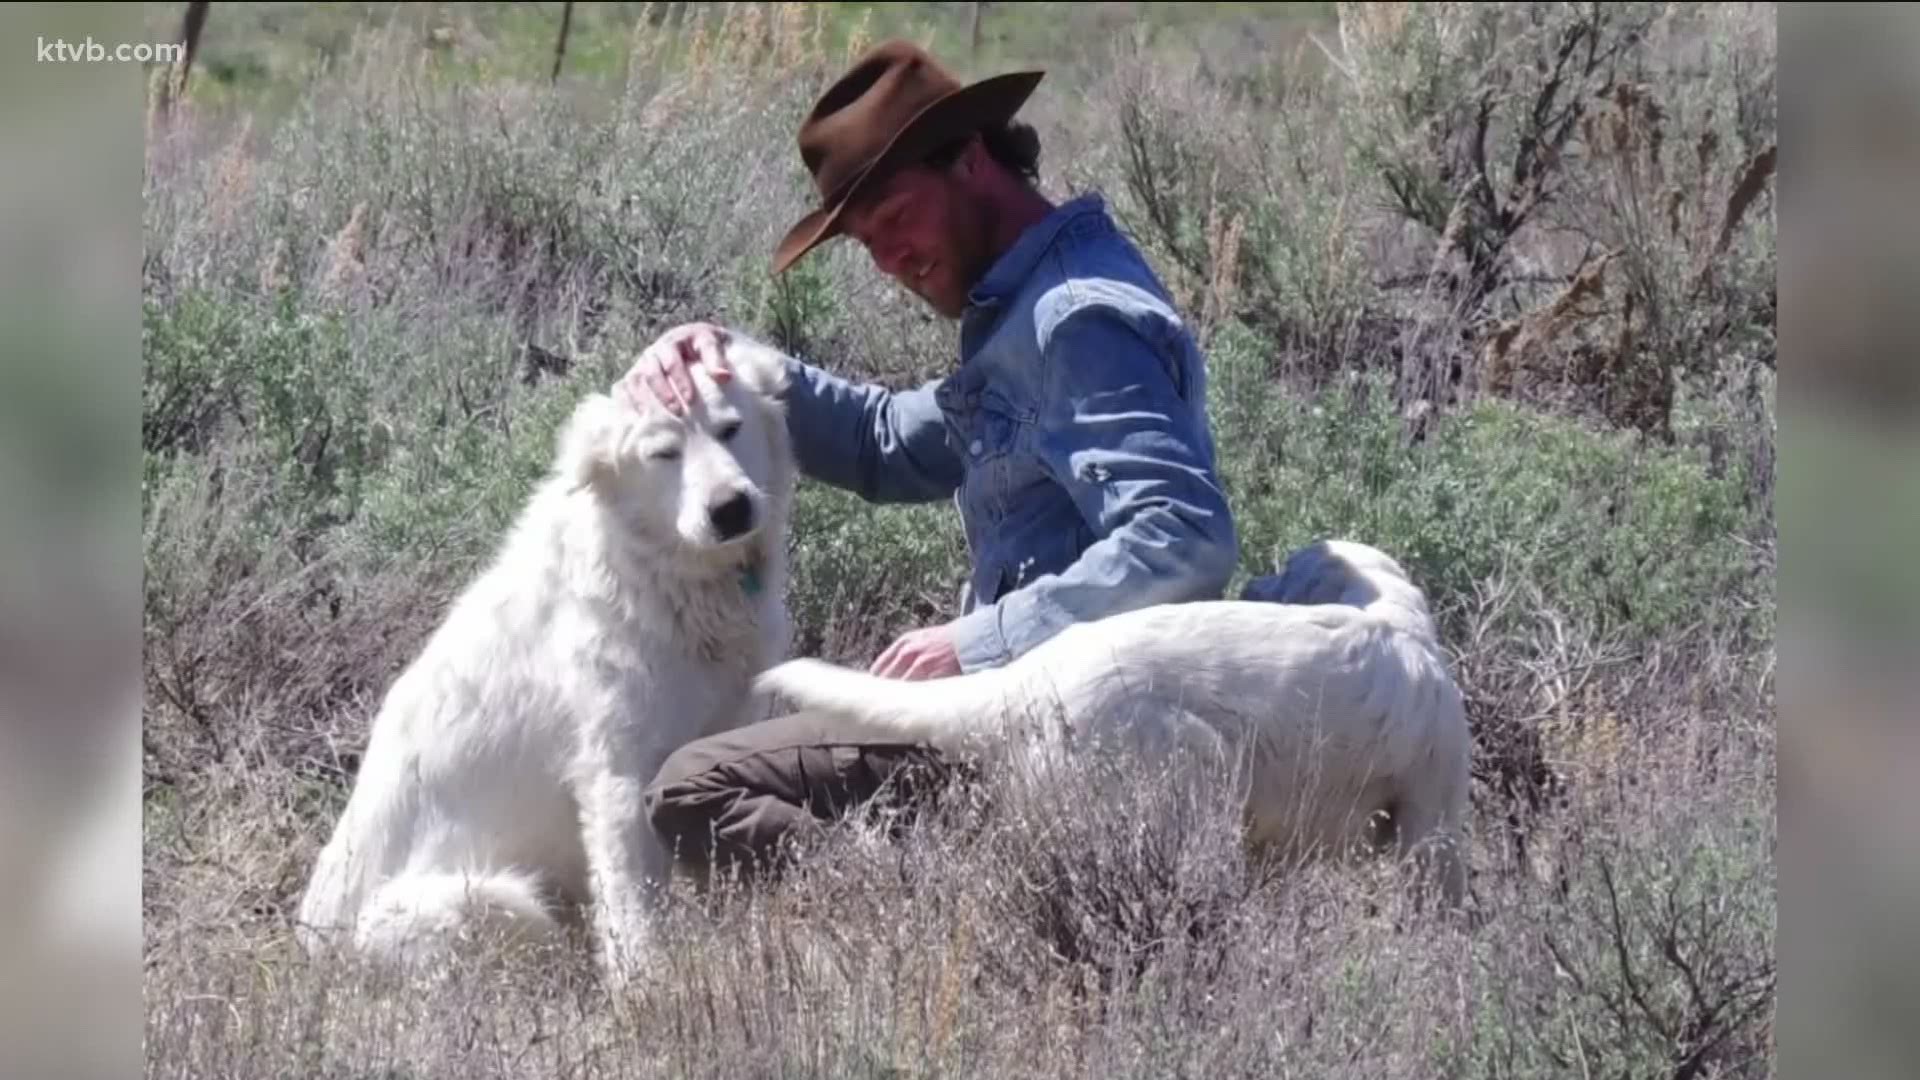 Flat Top Sheep rancher Cory Peavey says people keep taking his Great Pyrenees dogs to their own home or to animal shelters, leaving his flock unguarded.